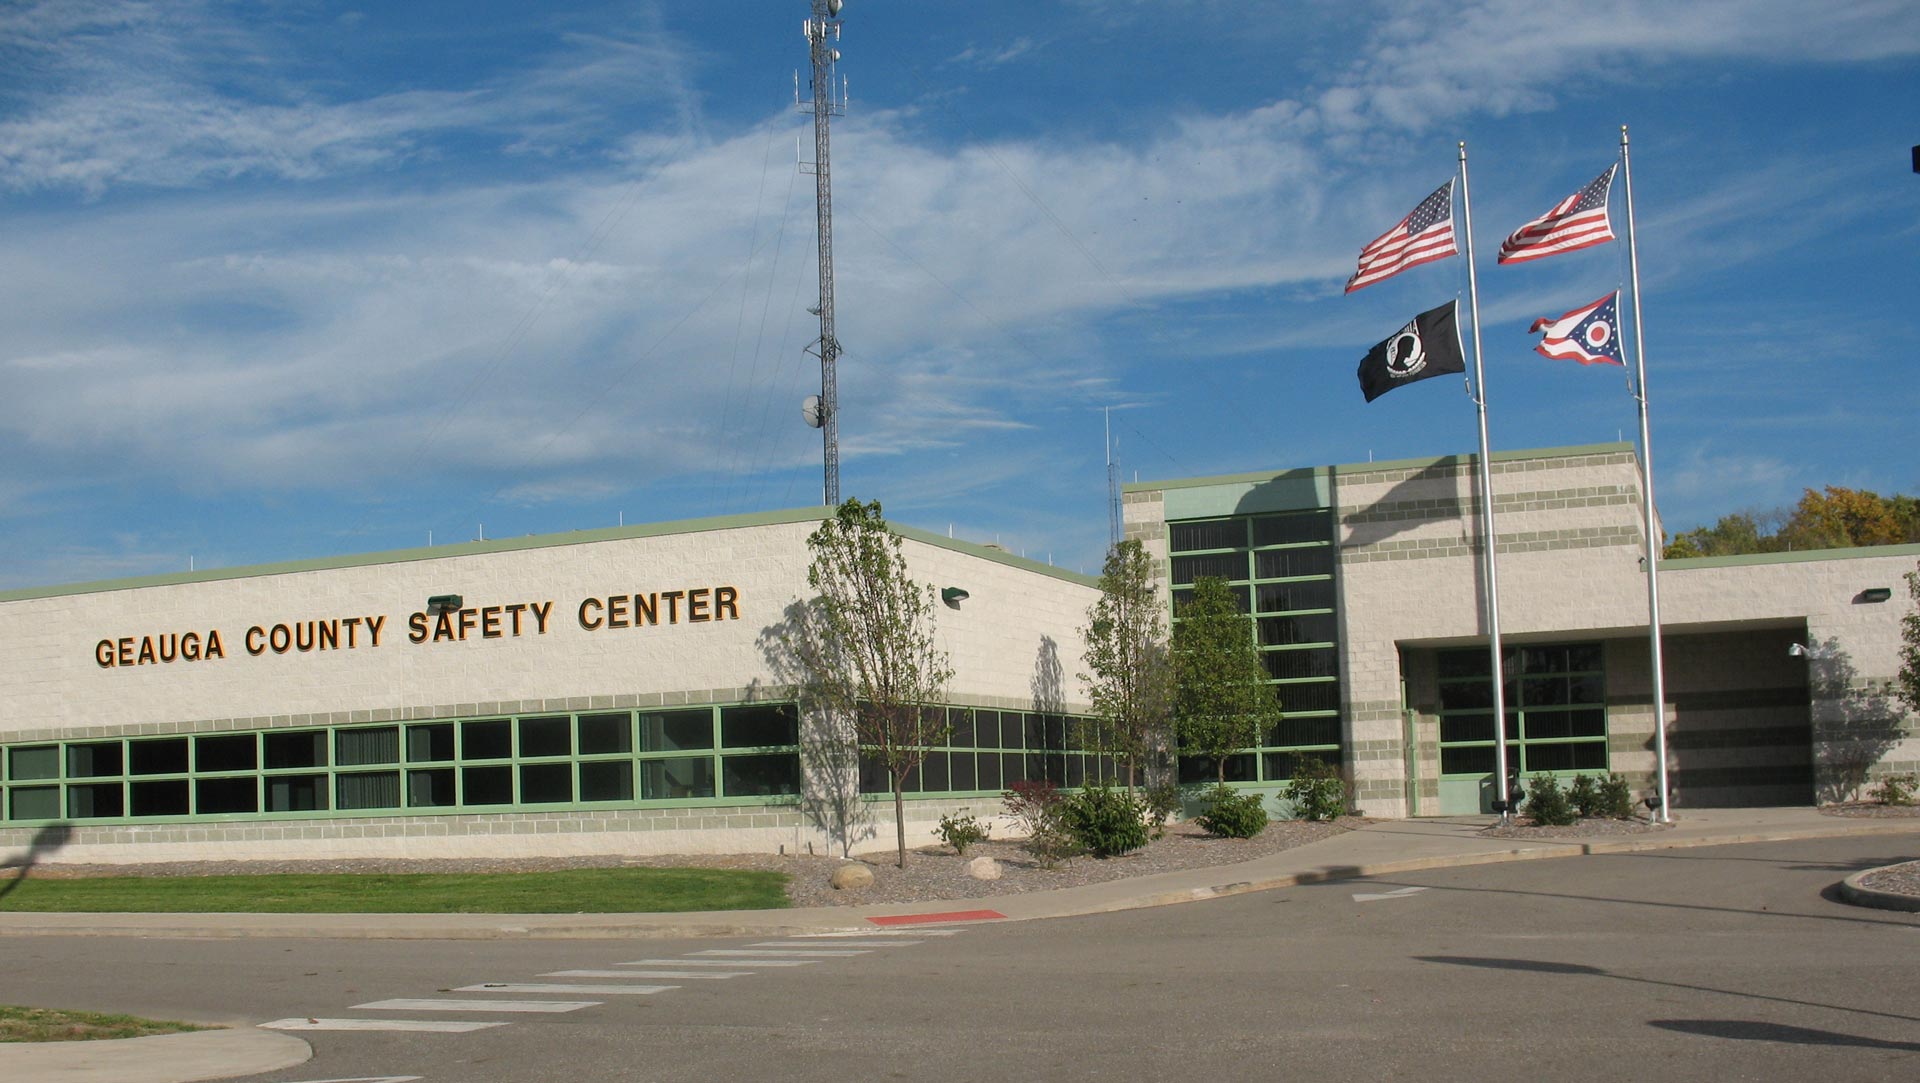 Geauga County Safety Center